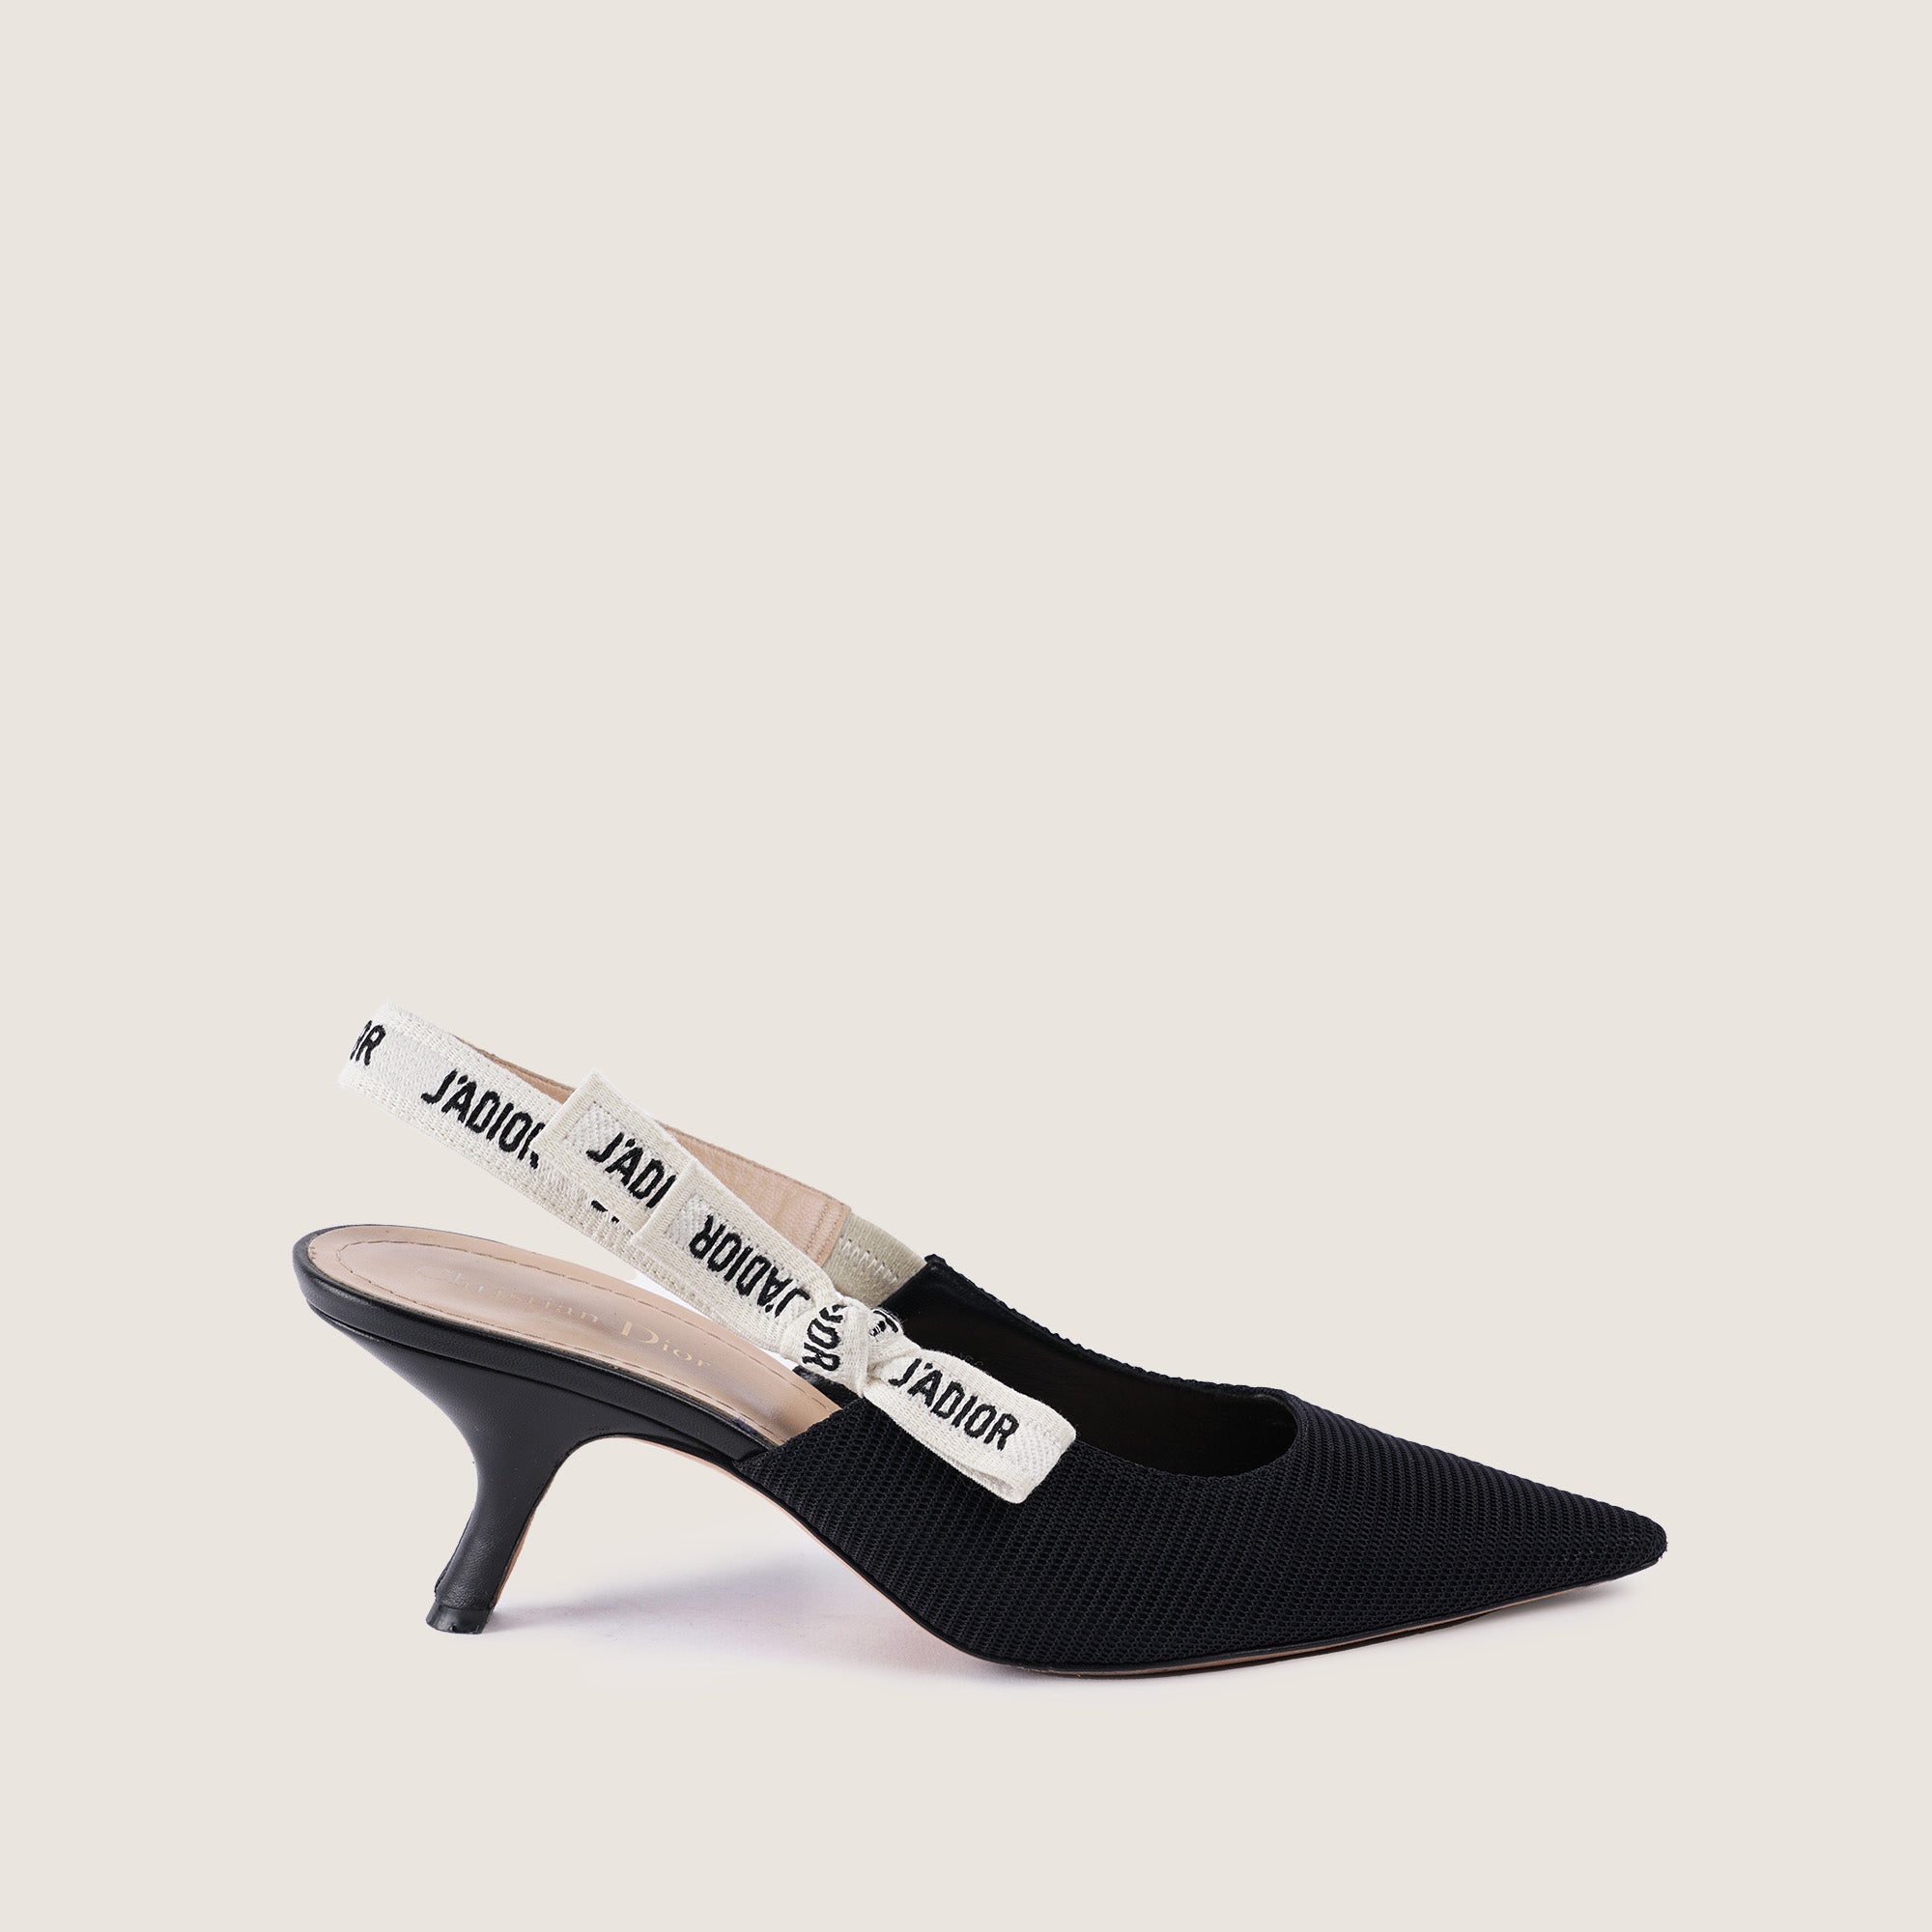 J'adore Slingback 42 - CHRISTIAN DIOR - Affordable Luxury image